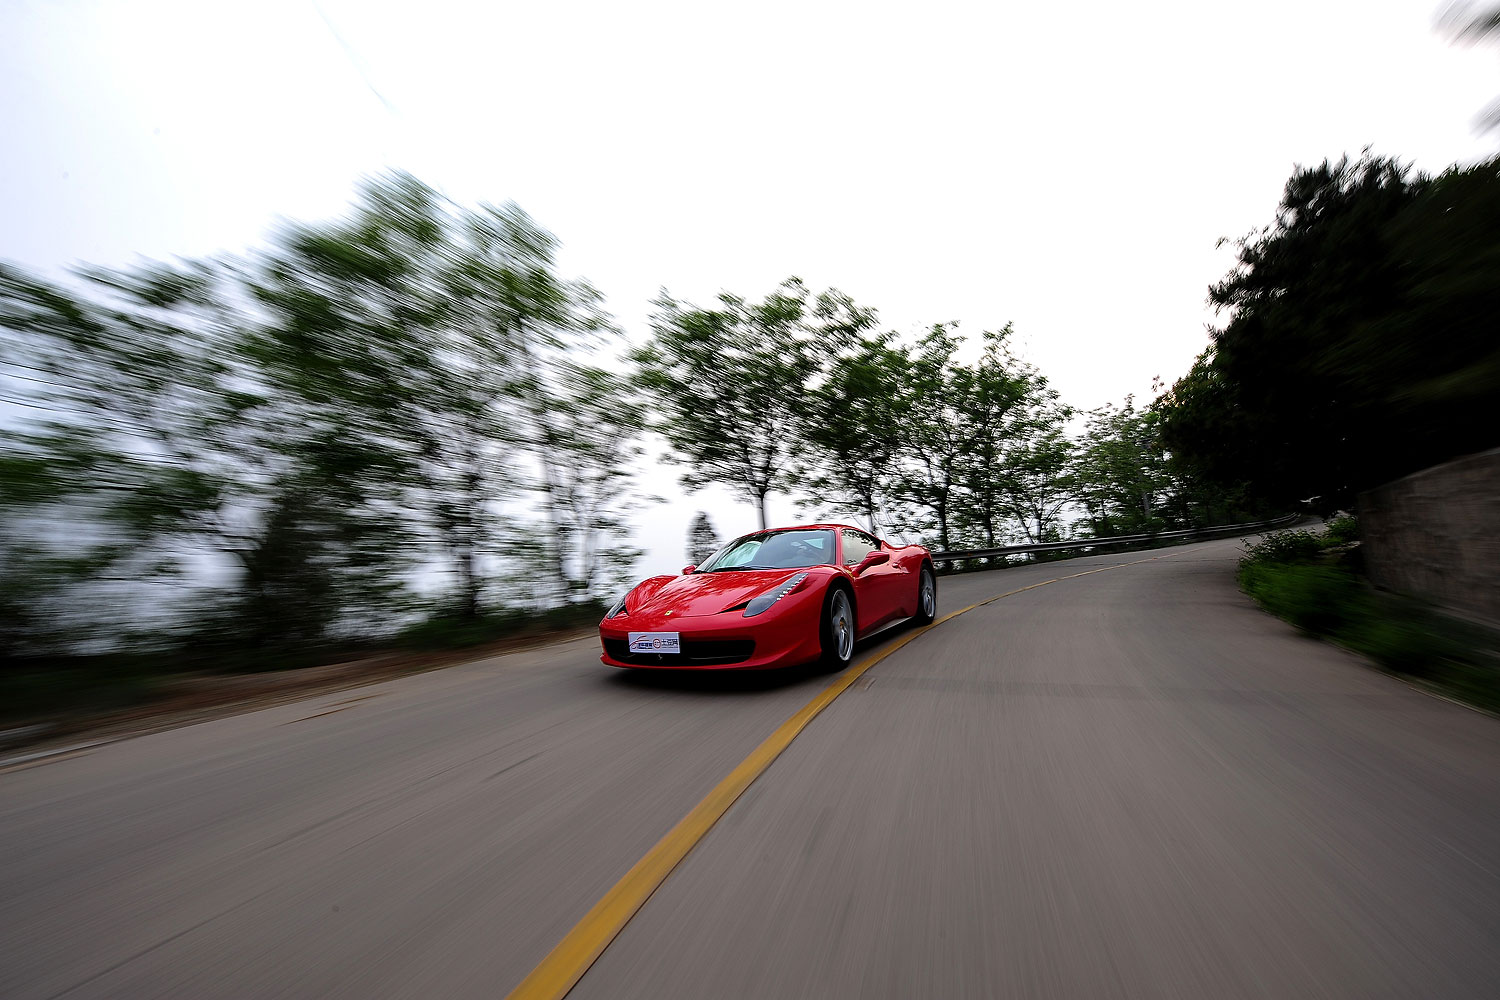 A Ferrari 458 Italia sports car is road tested in Beijing. (China Photos—Getty Images)